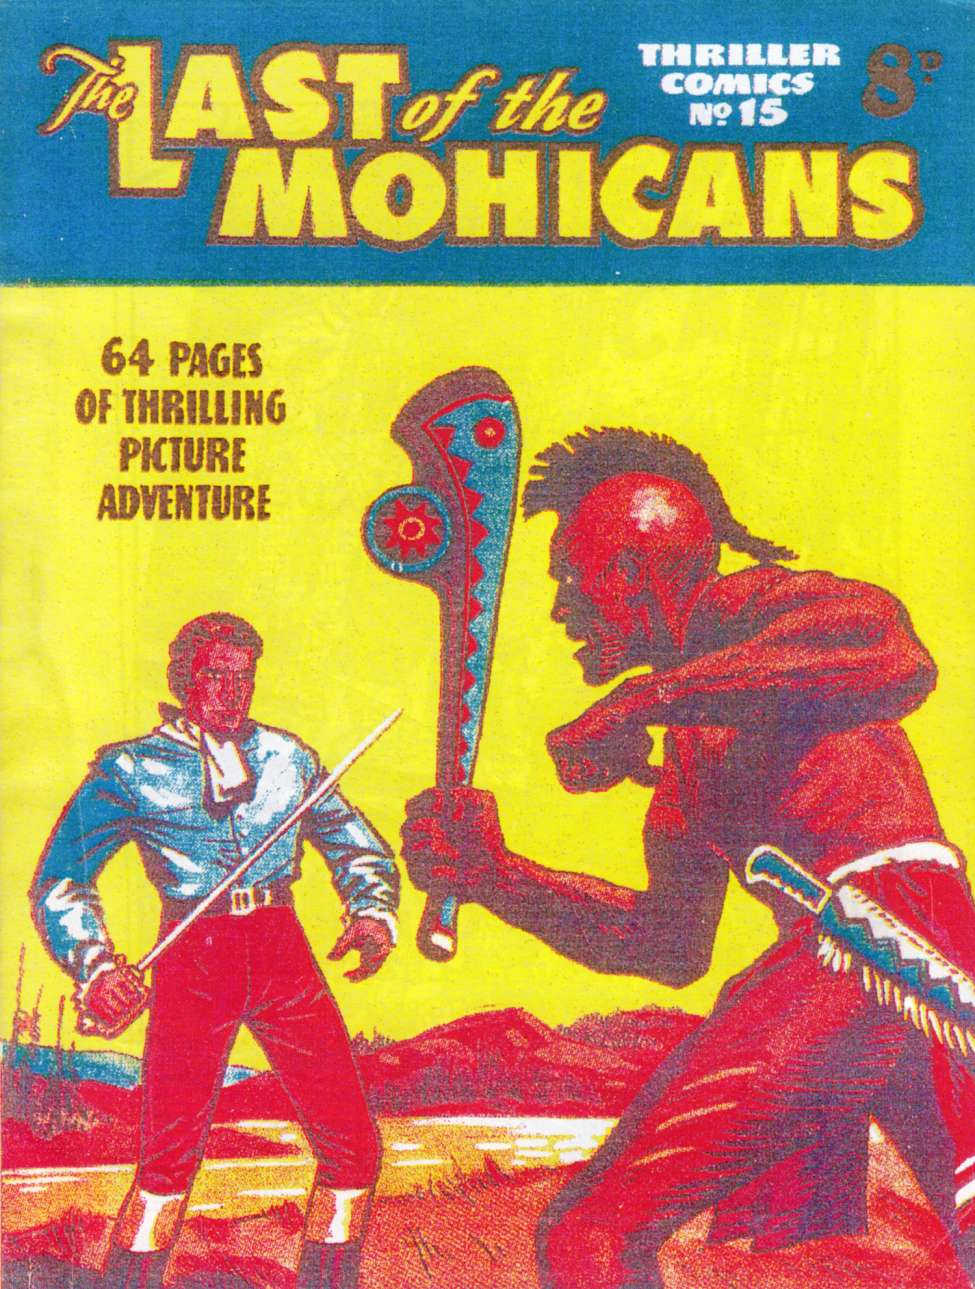 Comic Book Cover For Thriller Comics 15 - The Last of the Mohicans